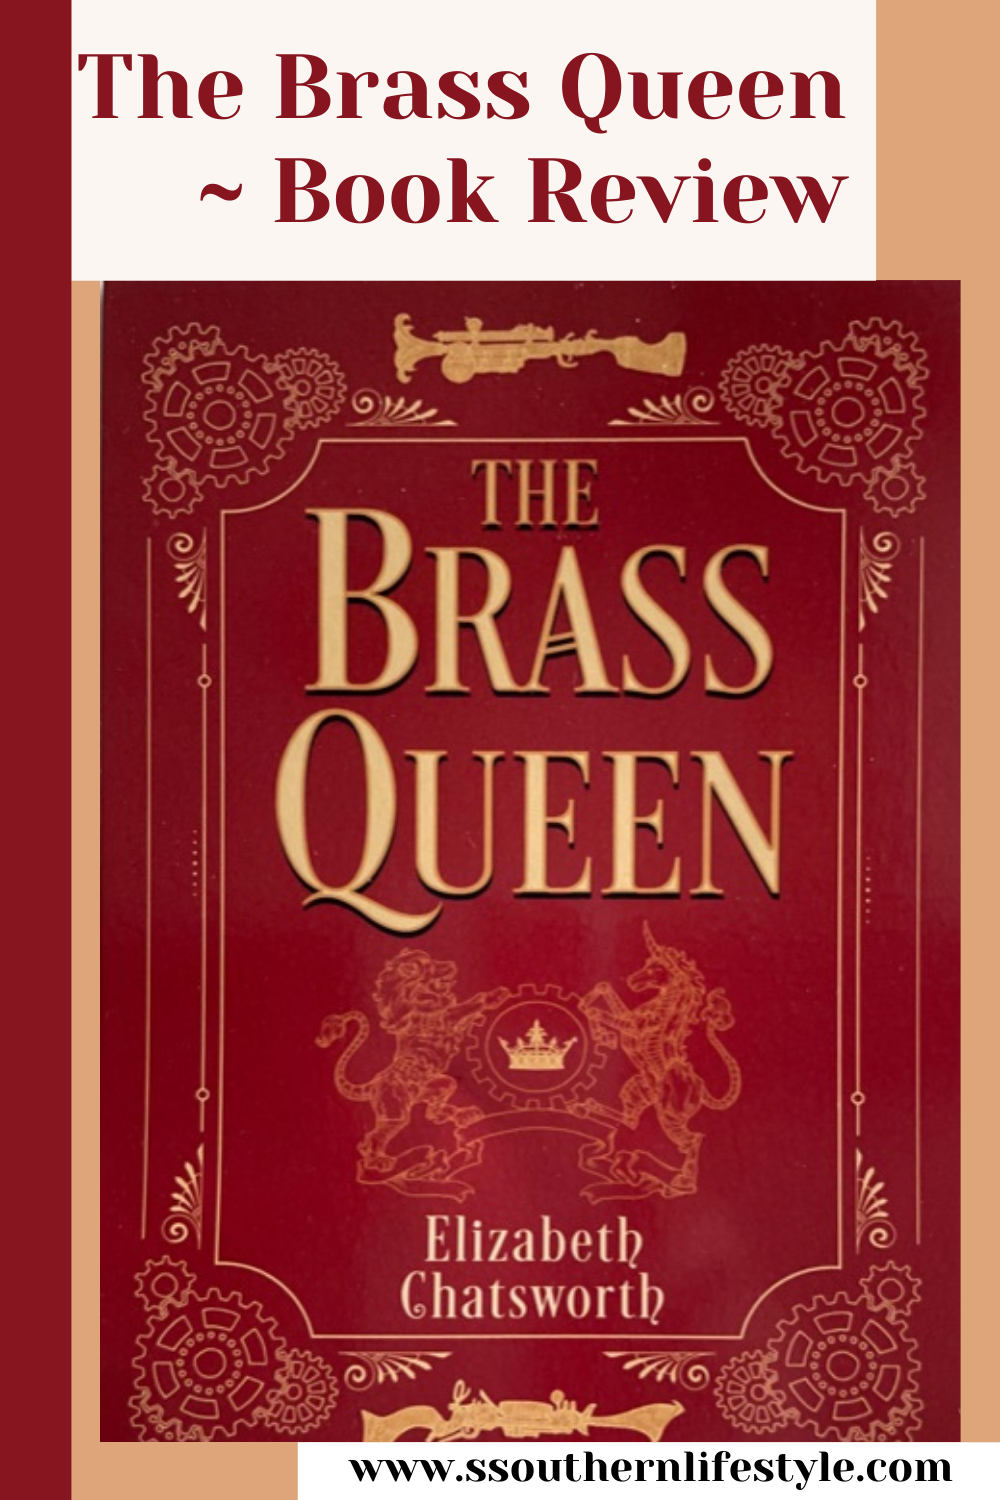 New 2021 book review The Brass Queen mystery fantasy adventure science fiction